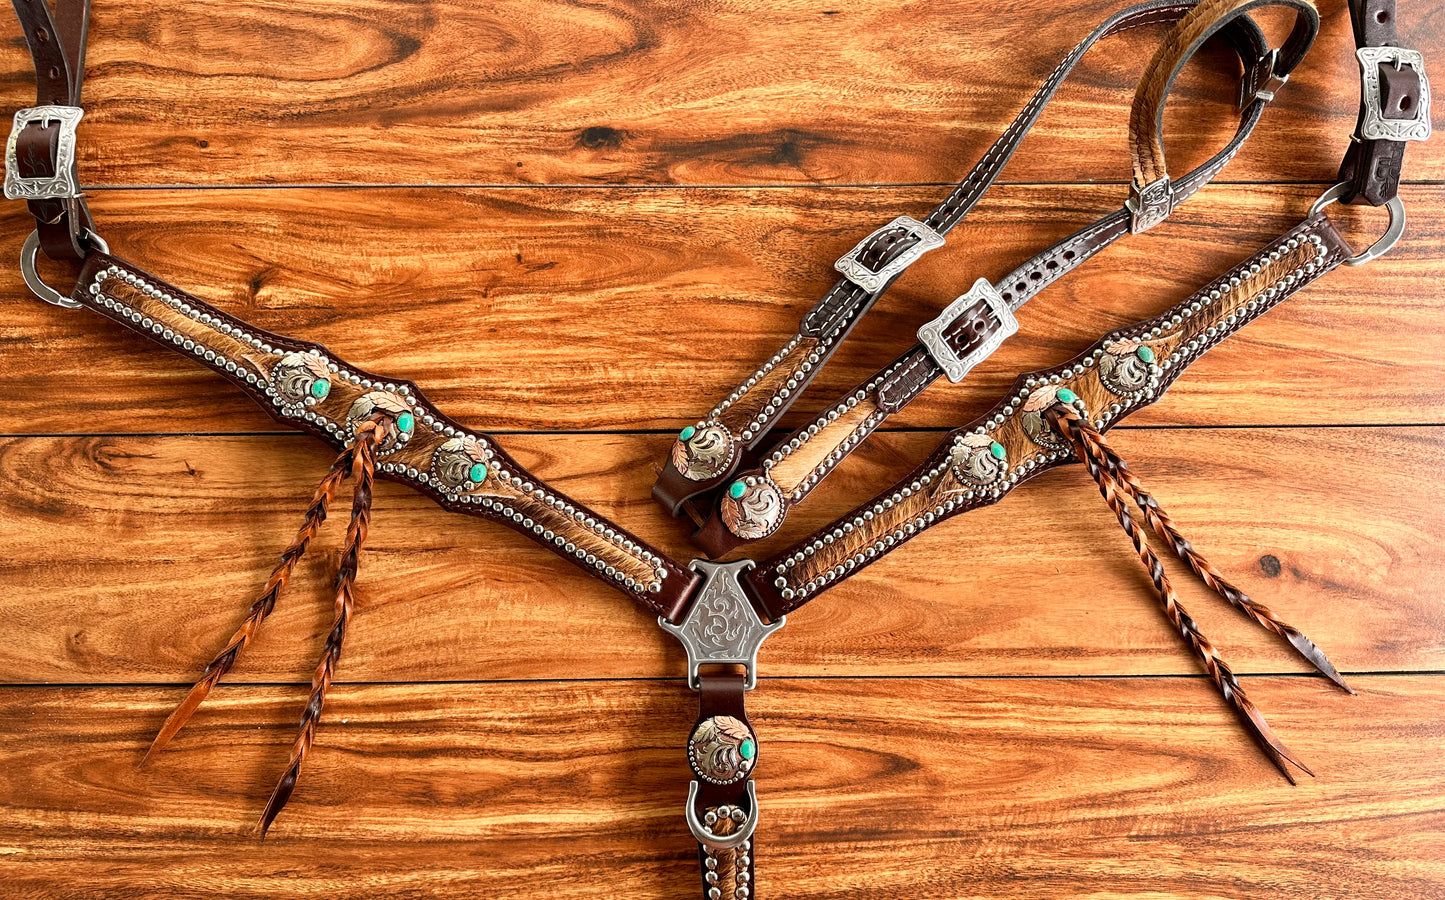 Cowhide with turquoise handmade conchos and twist fringe